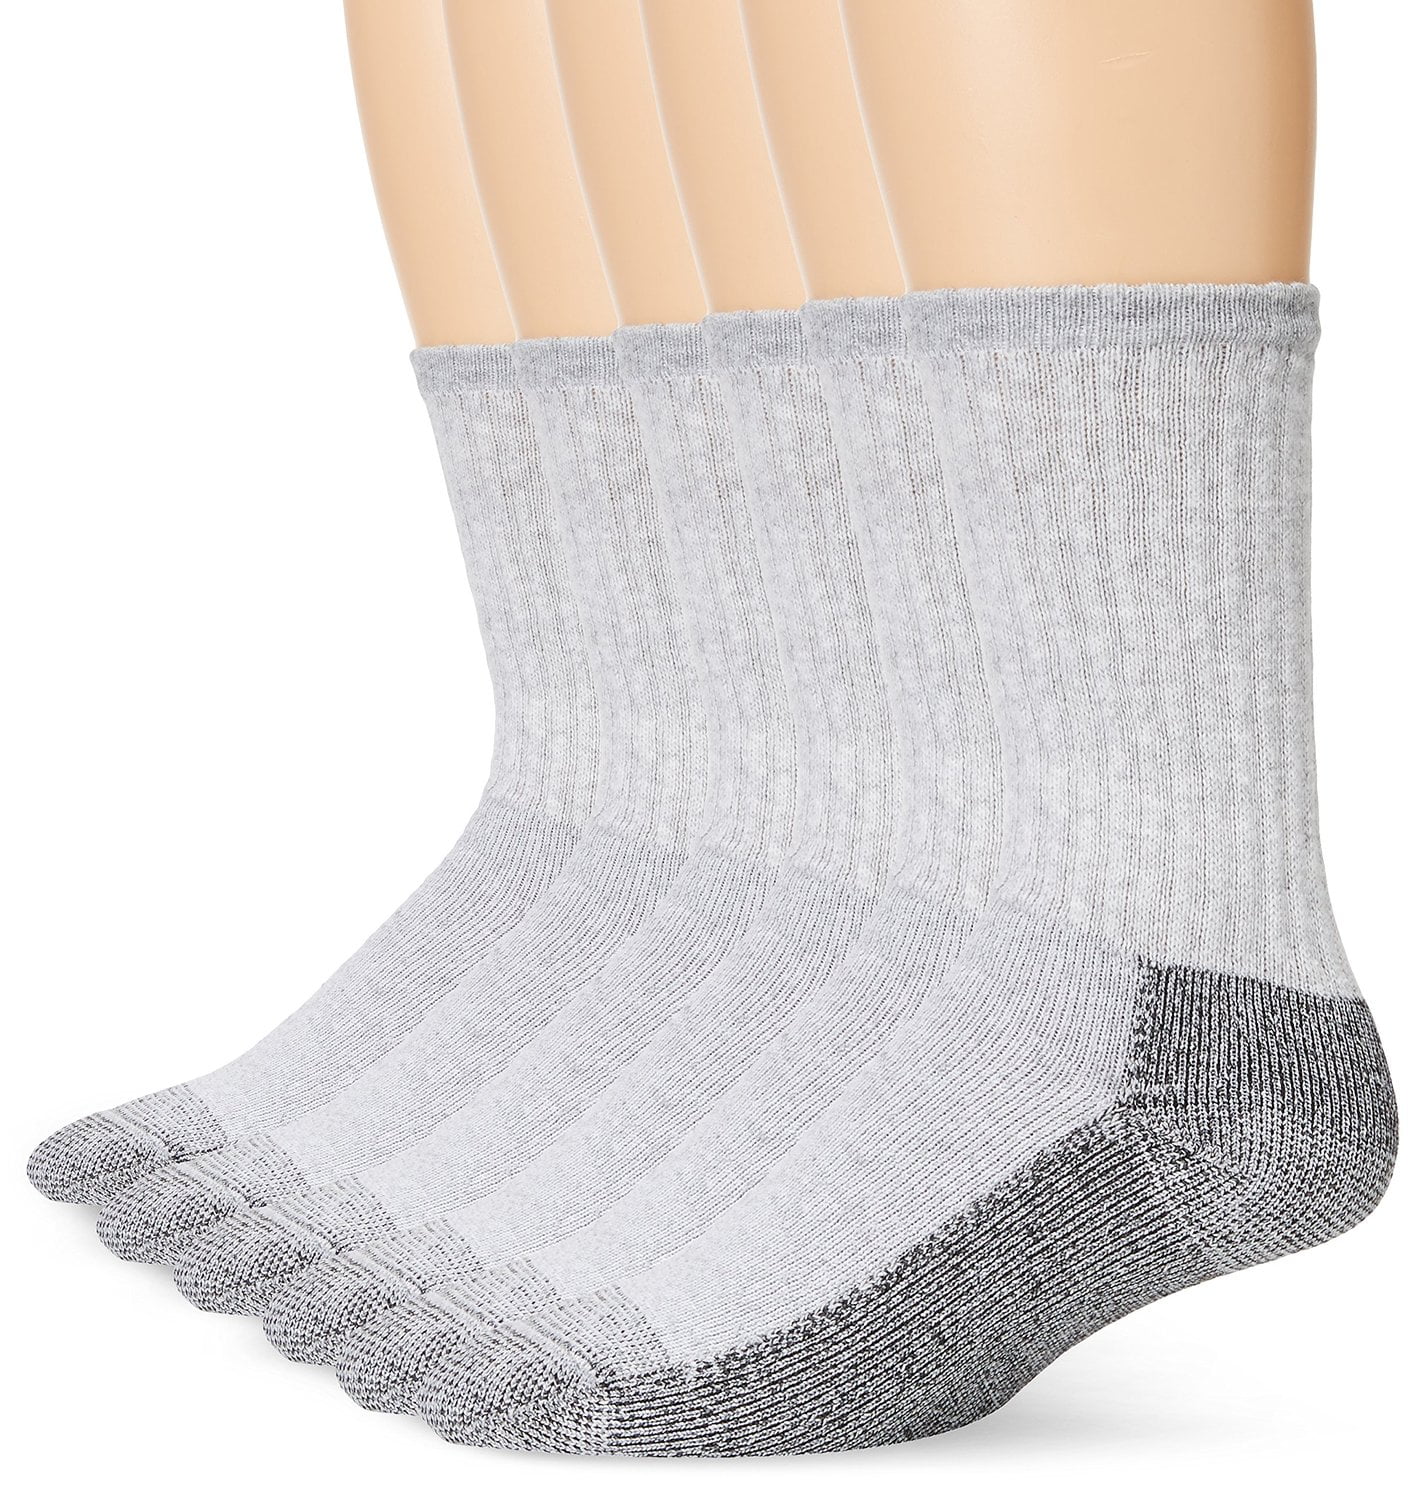 Pro Heavy Duty Hard Wearing High Quality Mens Work Socks For Safety Boots Shoes 